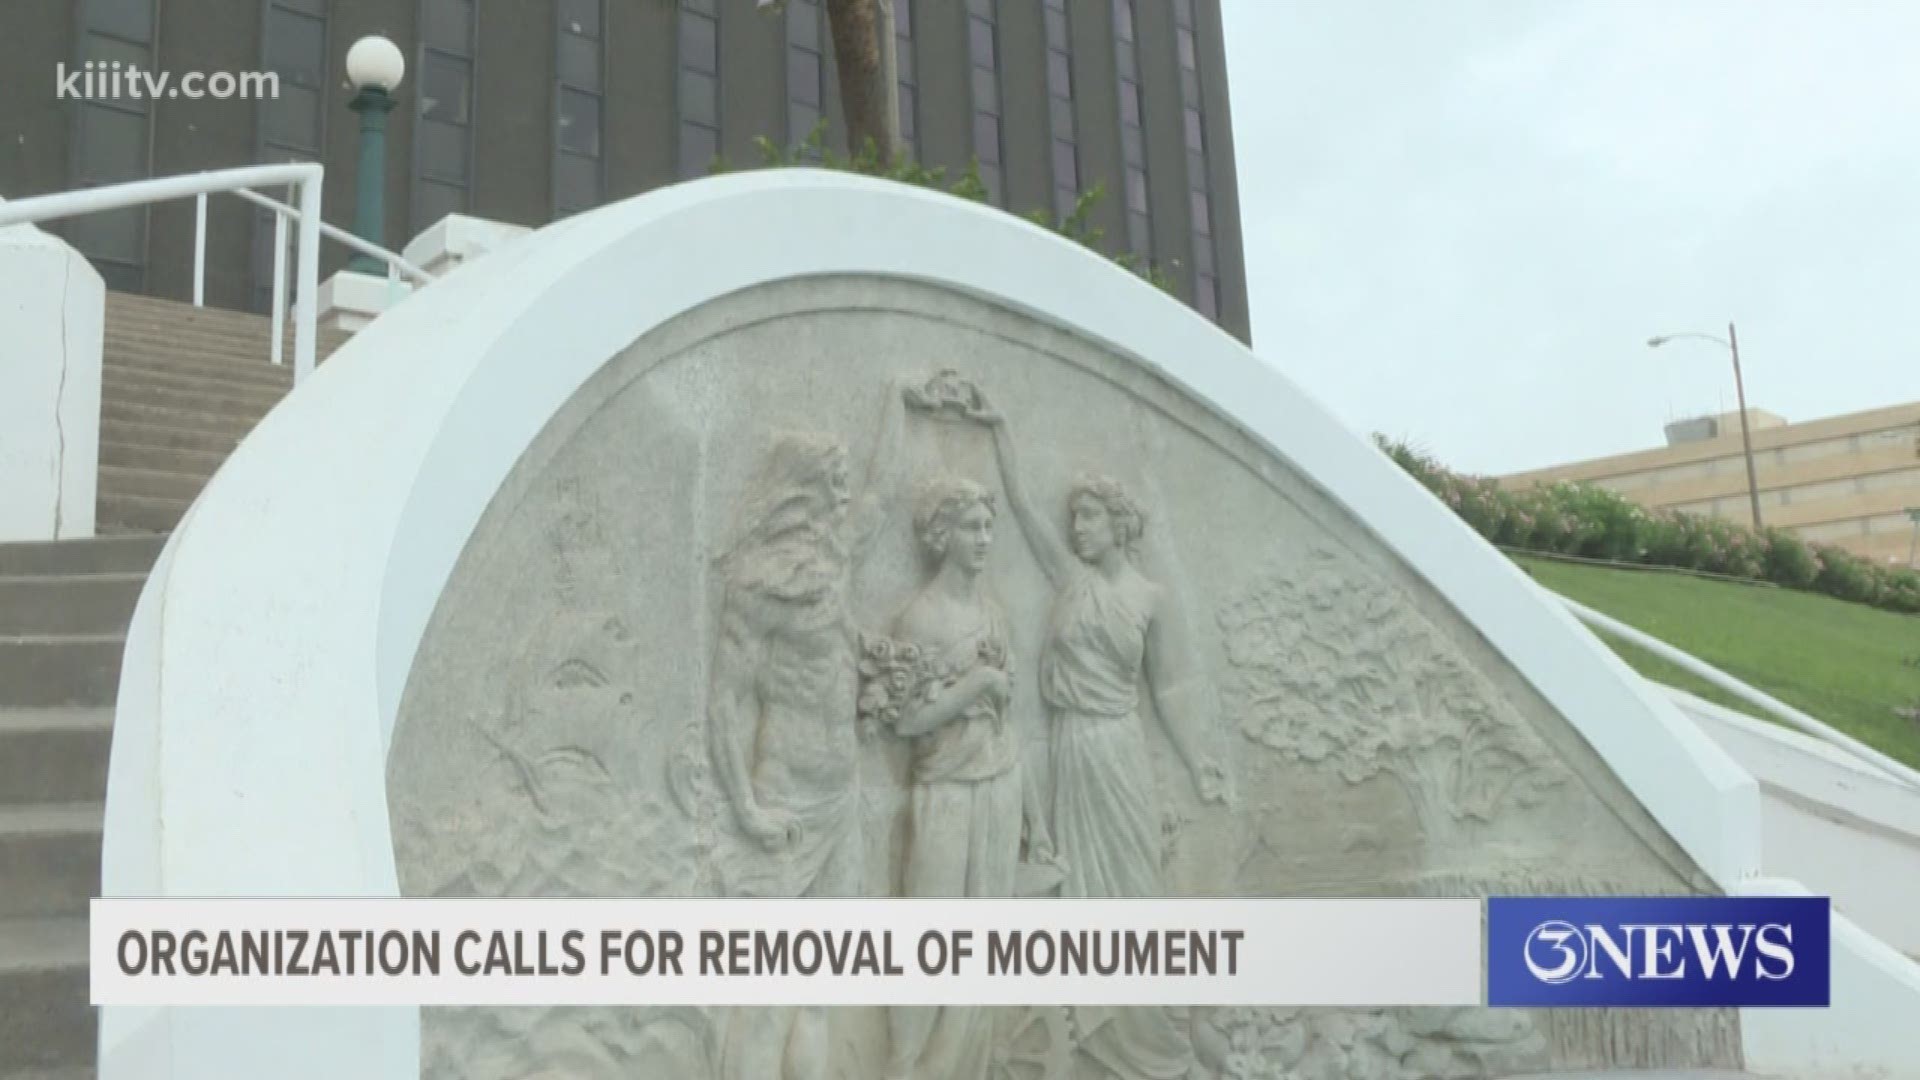 On Thursday, a local organization called for the removal of a monument in downtown Corpus Christi commsioned by the Daughters of The Confederacy.